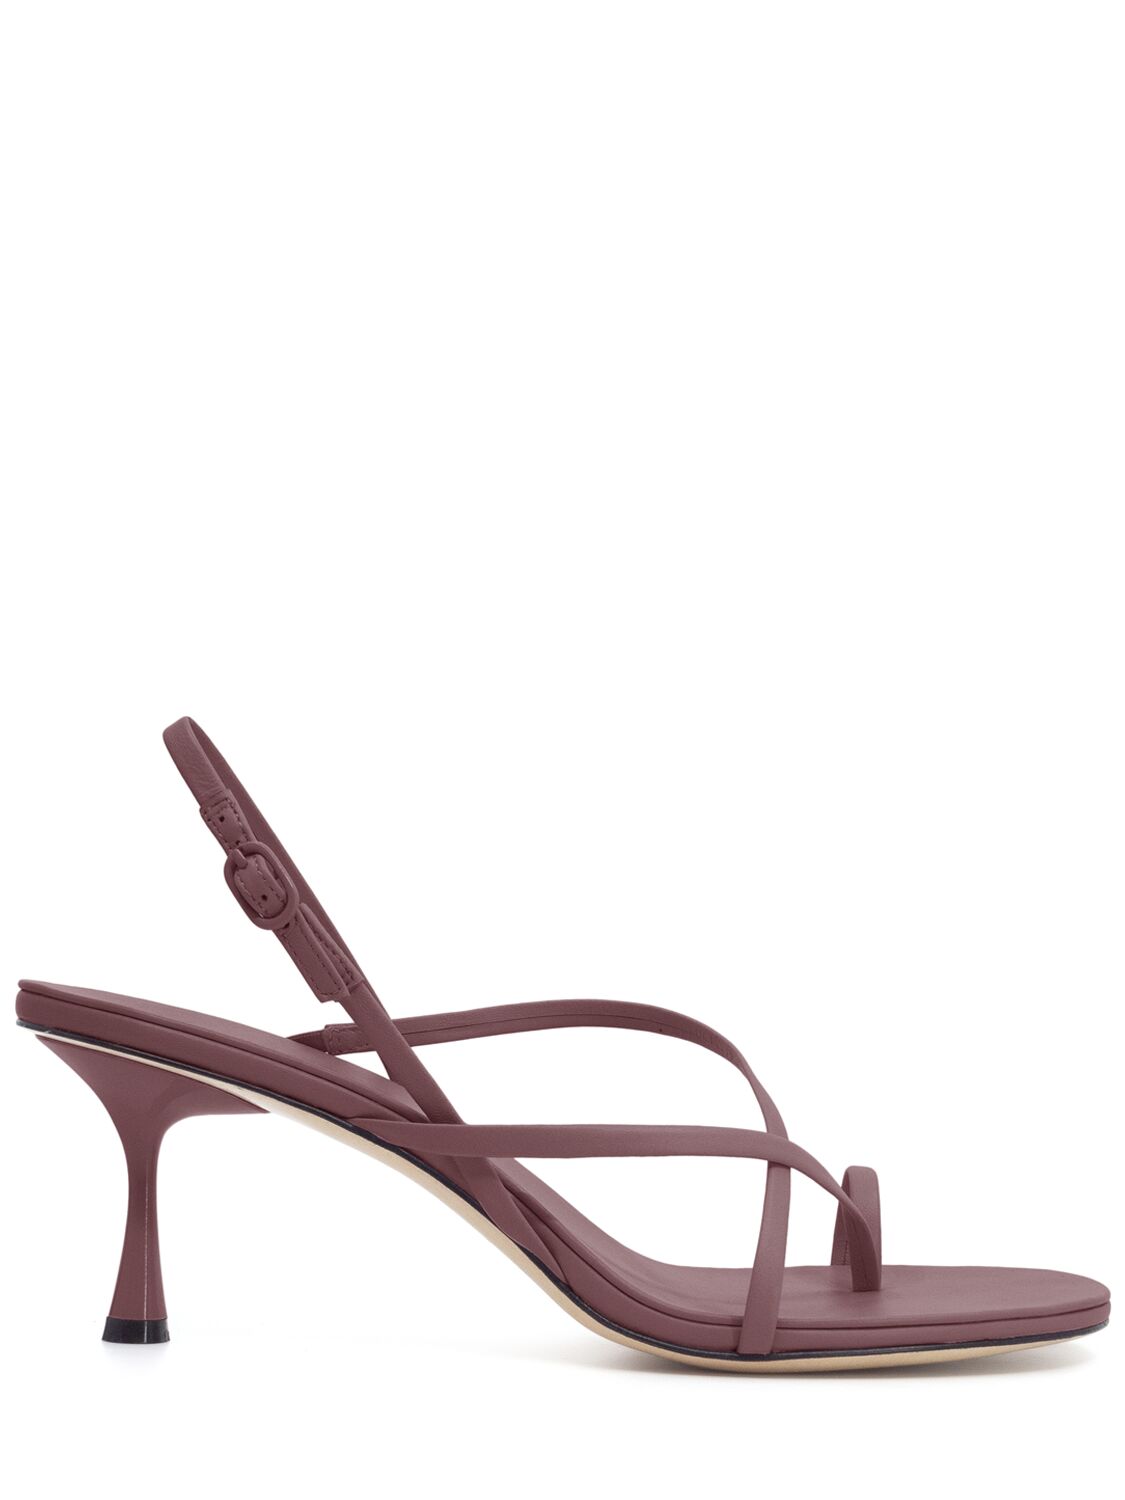 Studio Amelia 70mm Agatha Leather Sandals In Mulberry